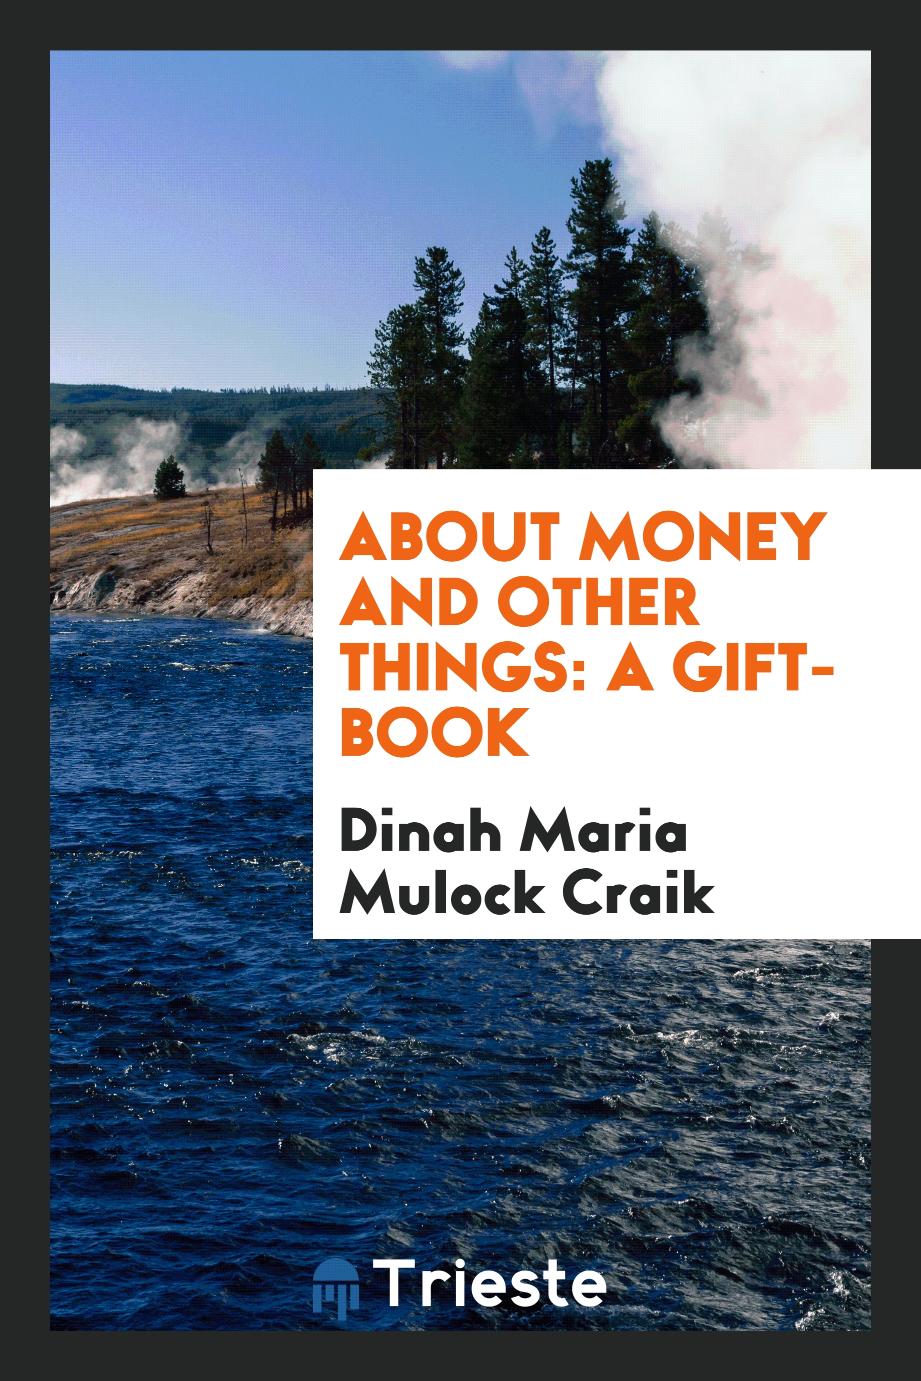 About money and other things: a gift-book